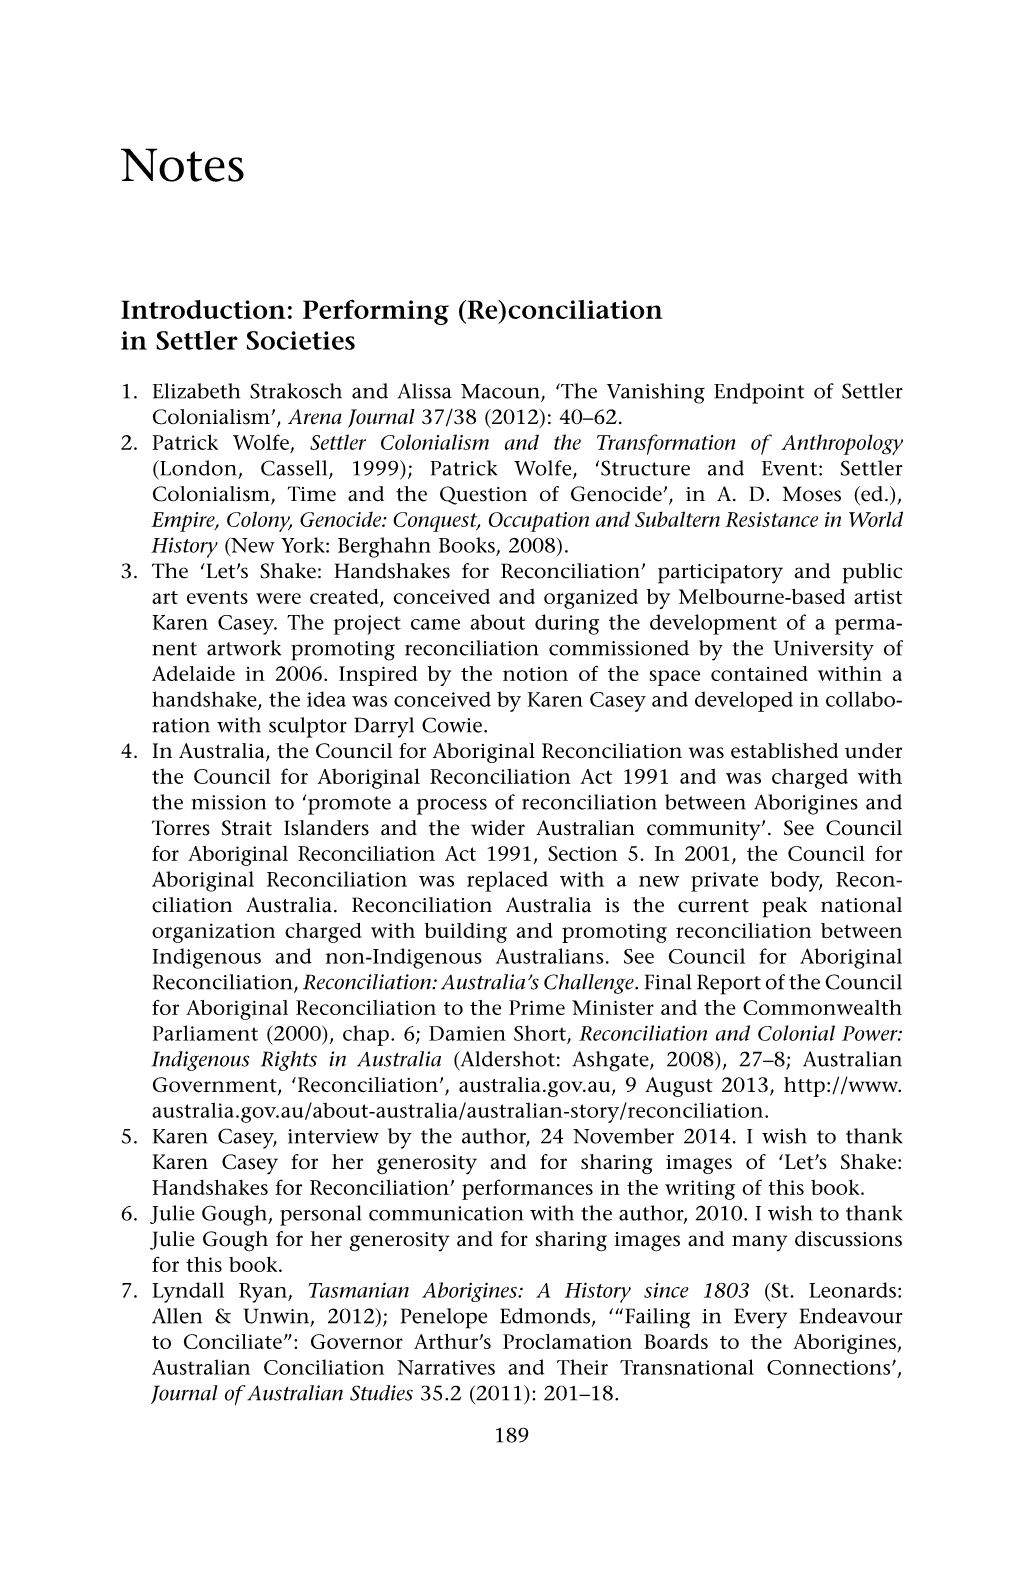 Introduction: Performing (Re)Conciliation in Settler Societies